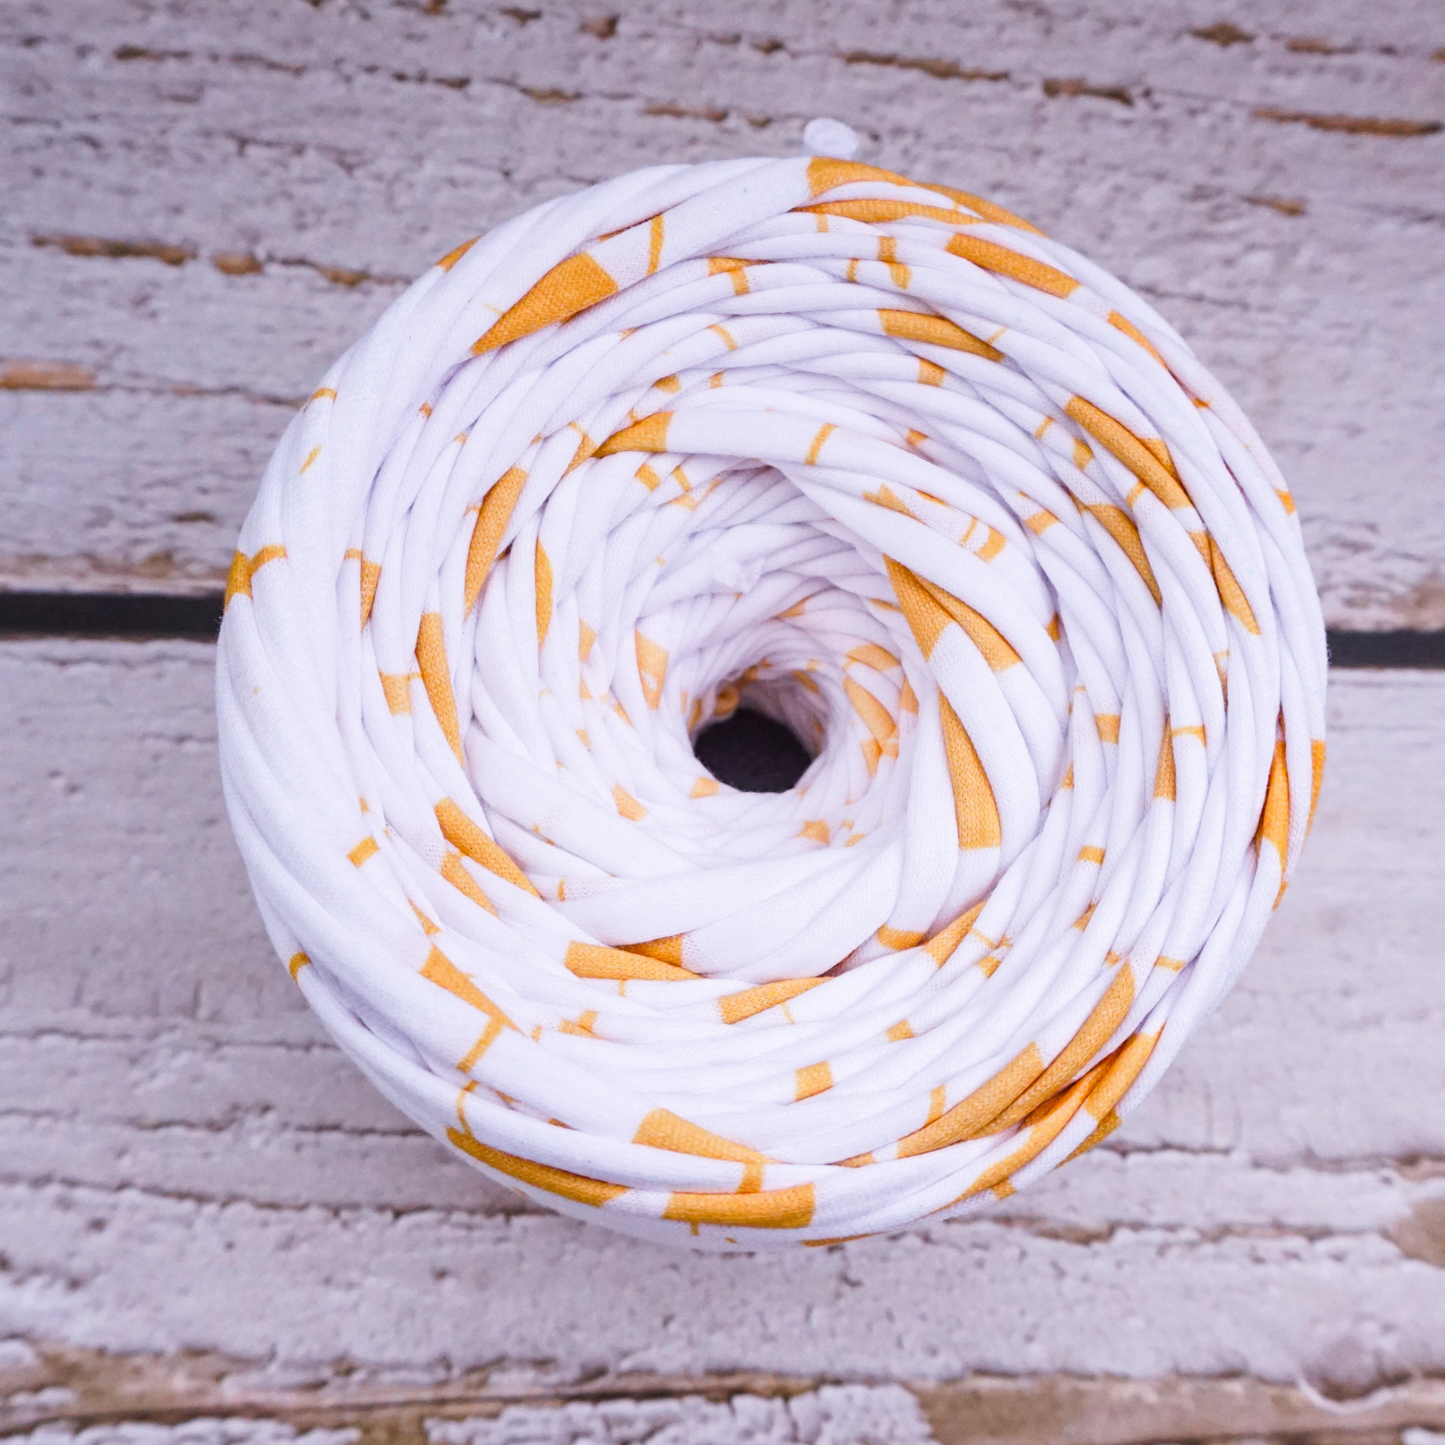 T-shirt yarn for crocheting baskets, bags, rugs and home decor. White with gold strokes